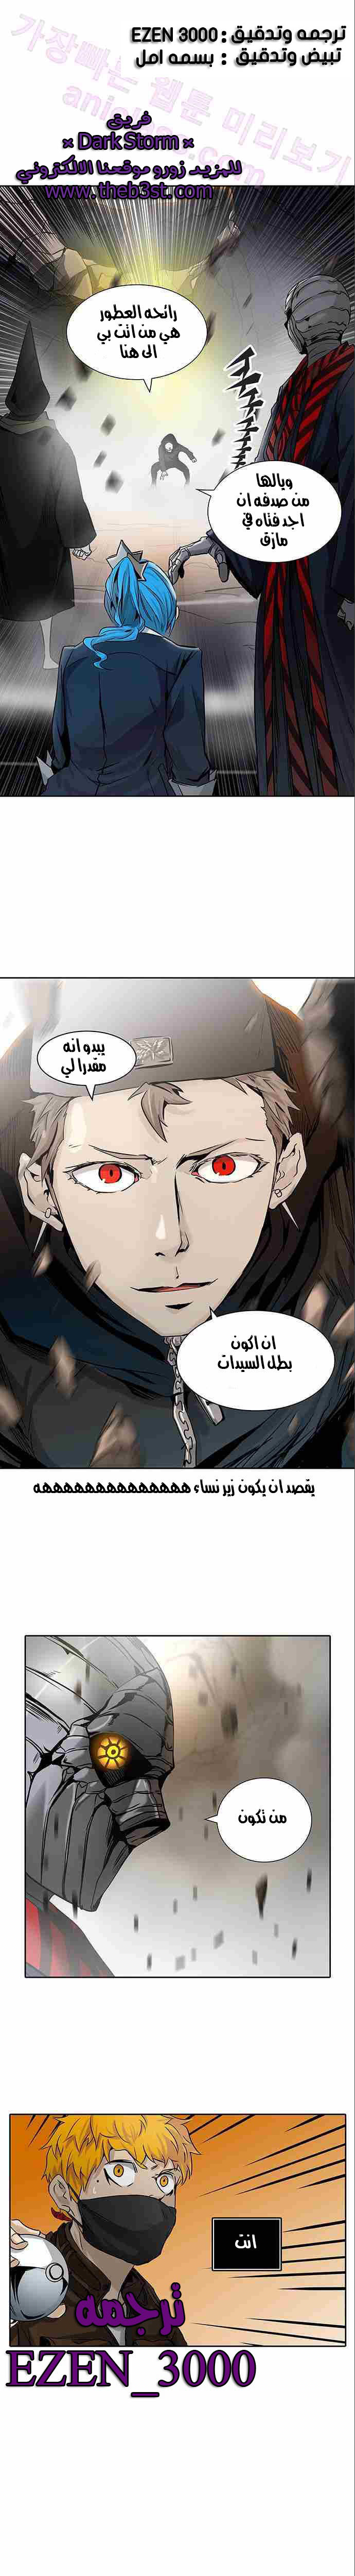 Tower of God 2: Chapter 246 - Page 1